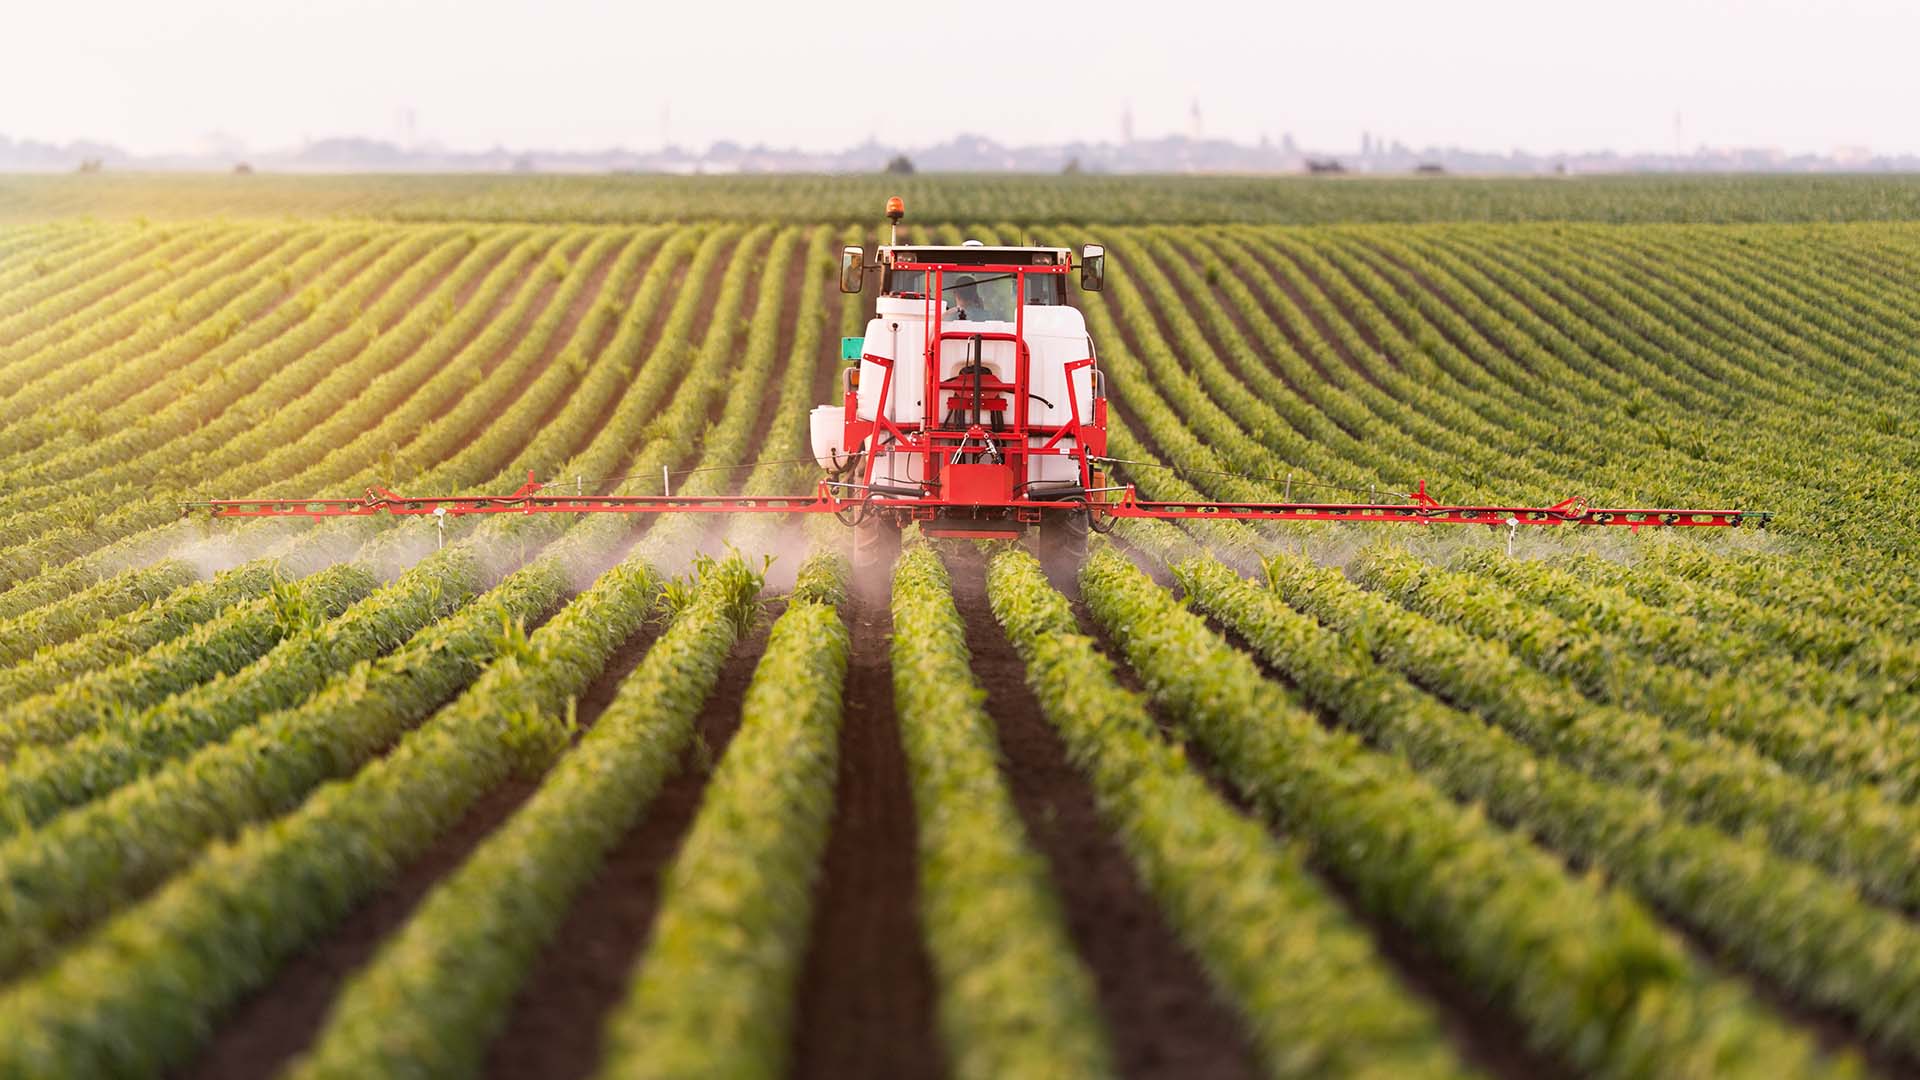 Tractor on farm spraying chemicals over rows of crops